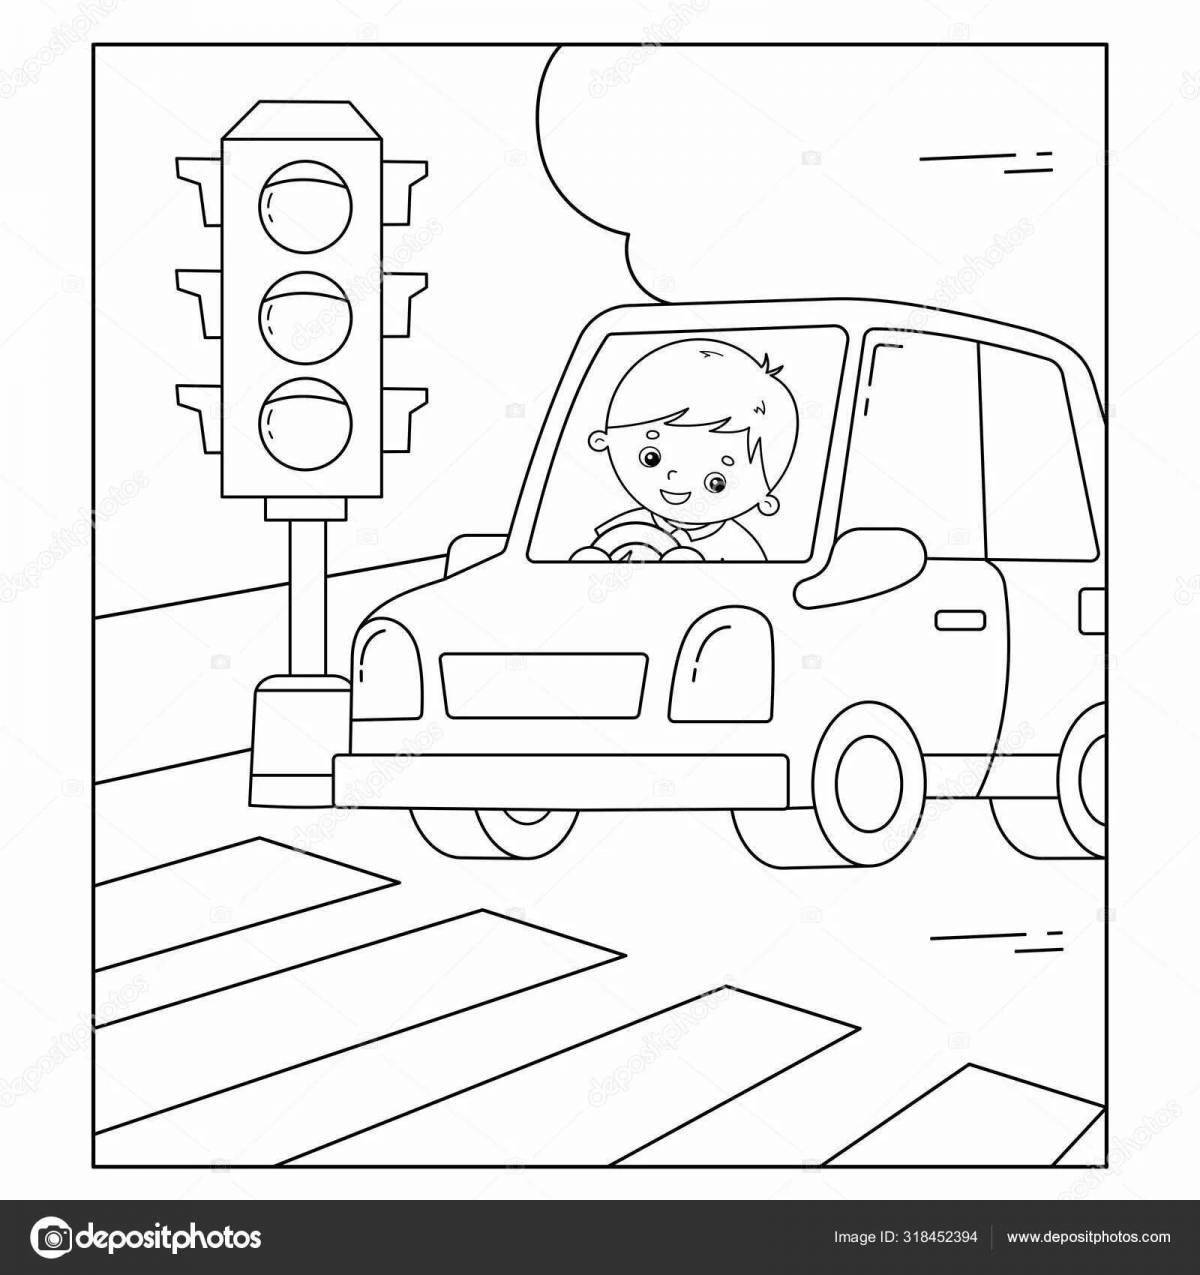 Great coloring of our familiar traffic light